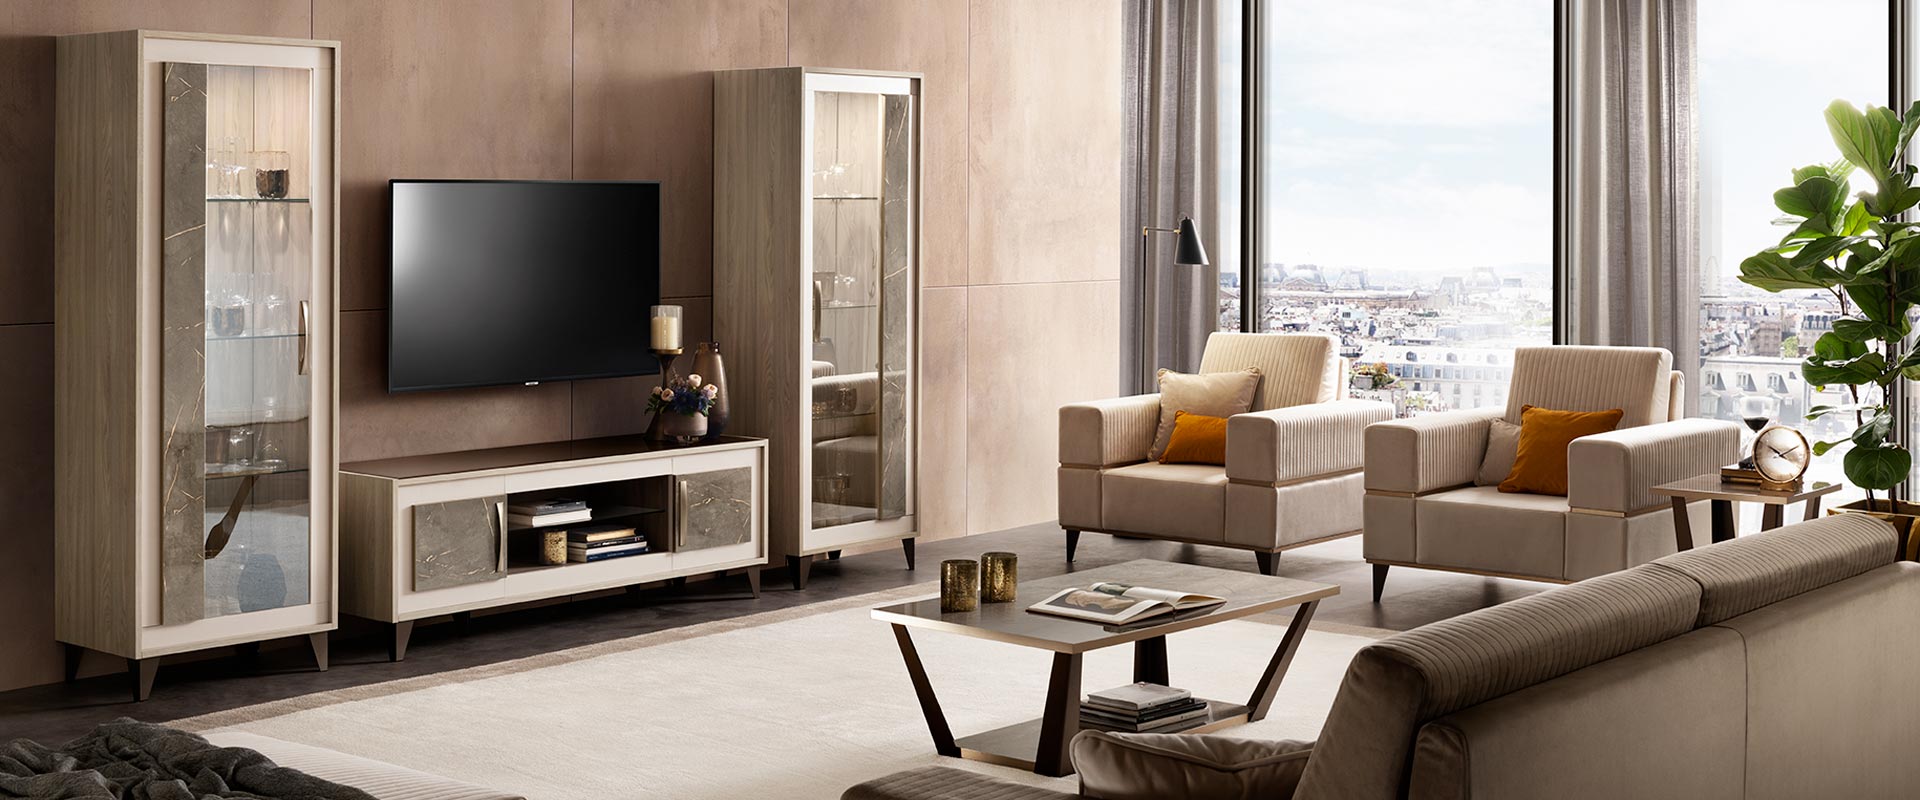 adora interiors ambra tv set composition with sofas and coffee tables